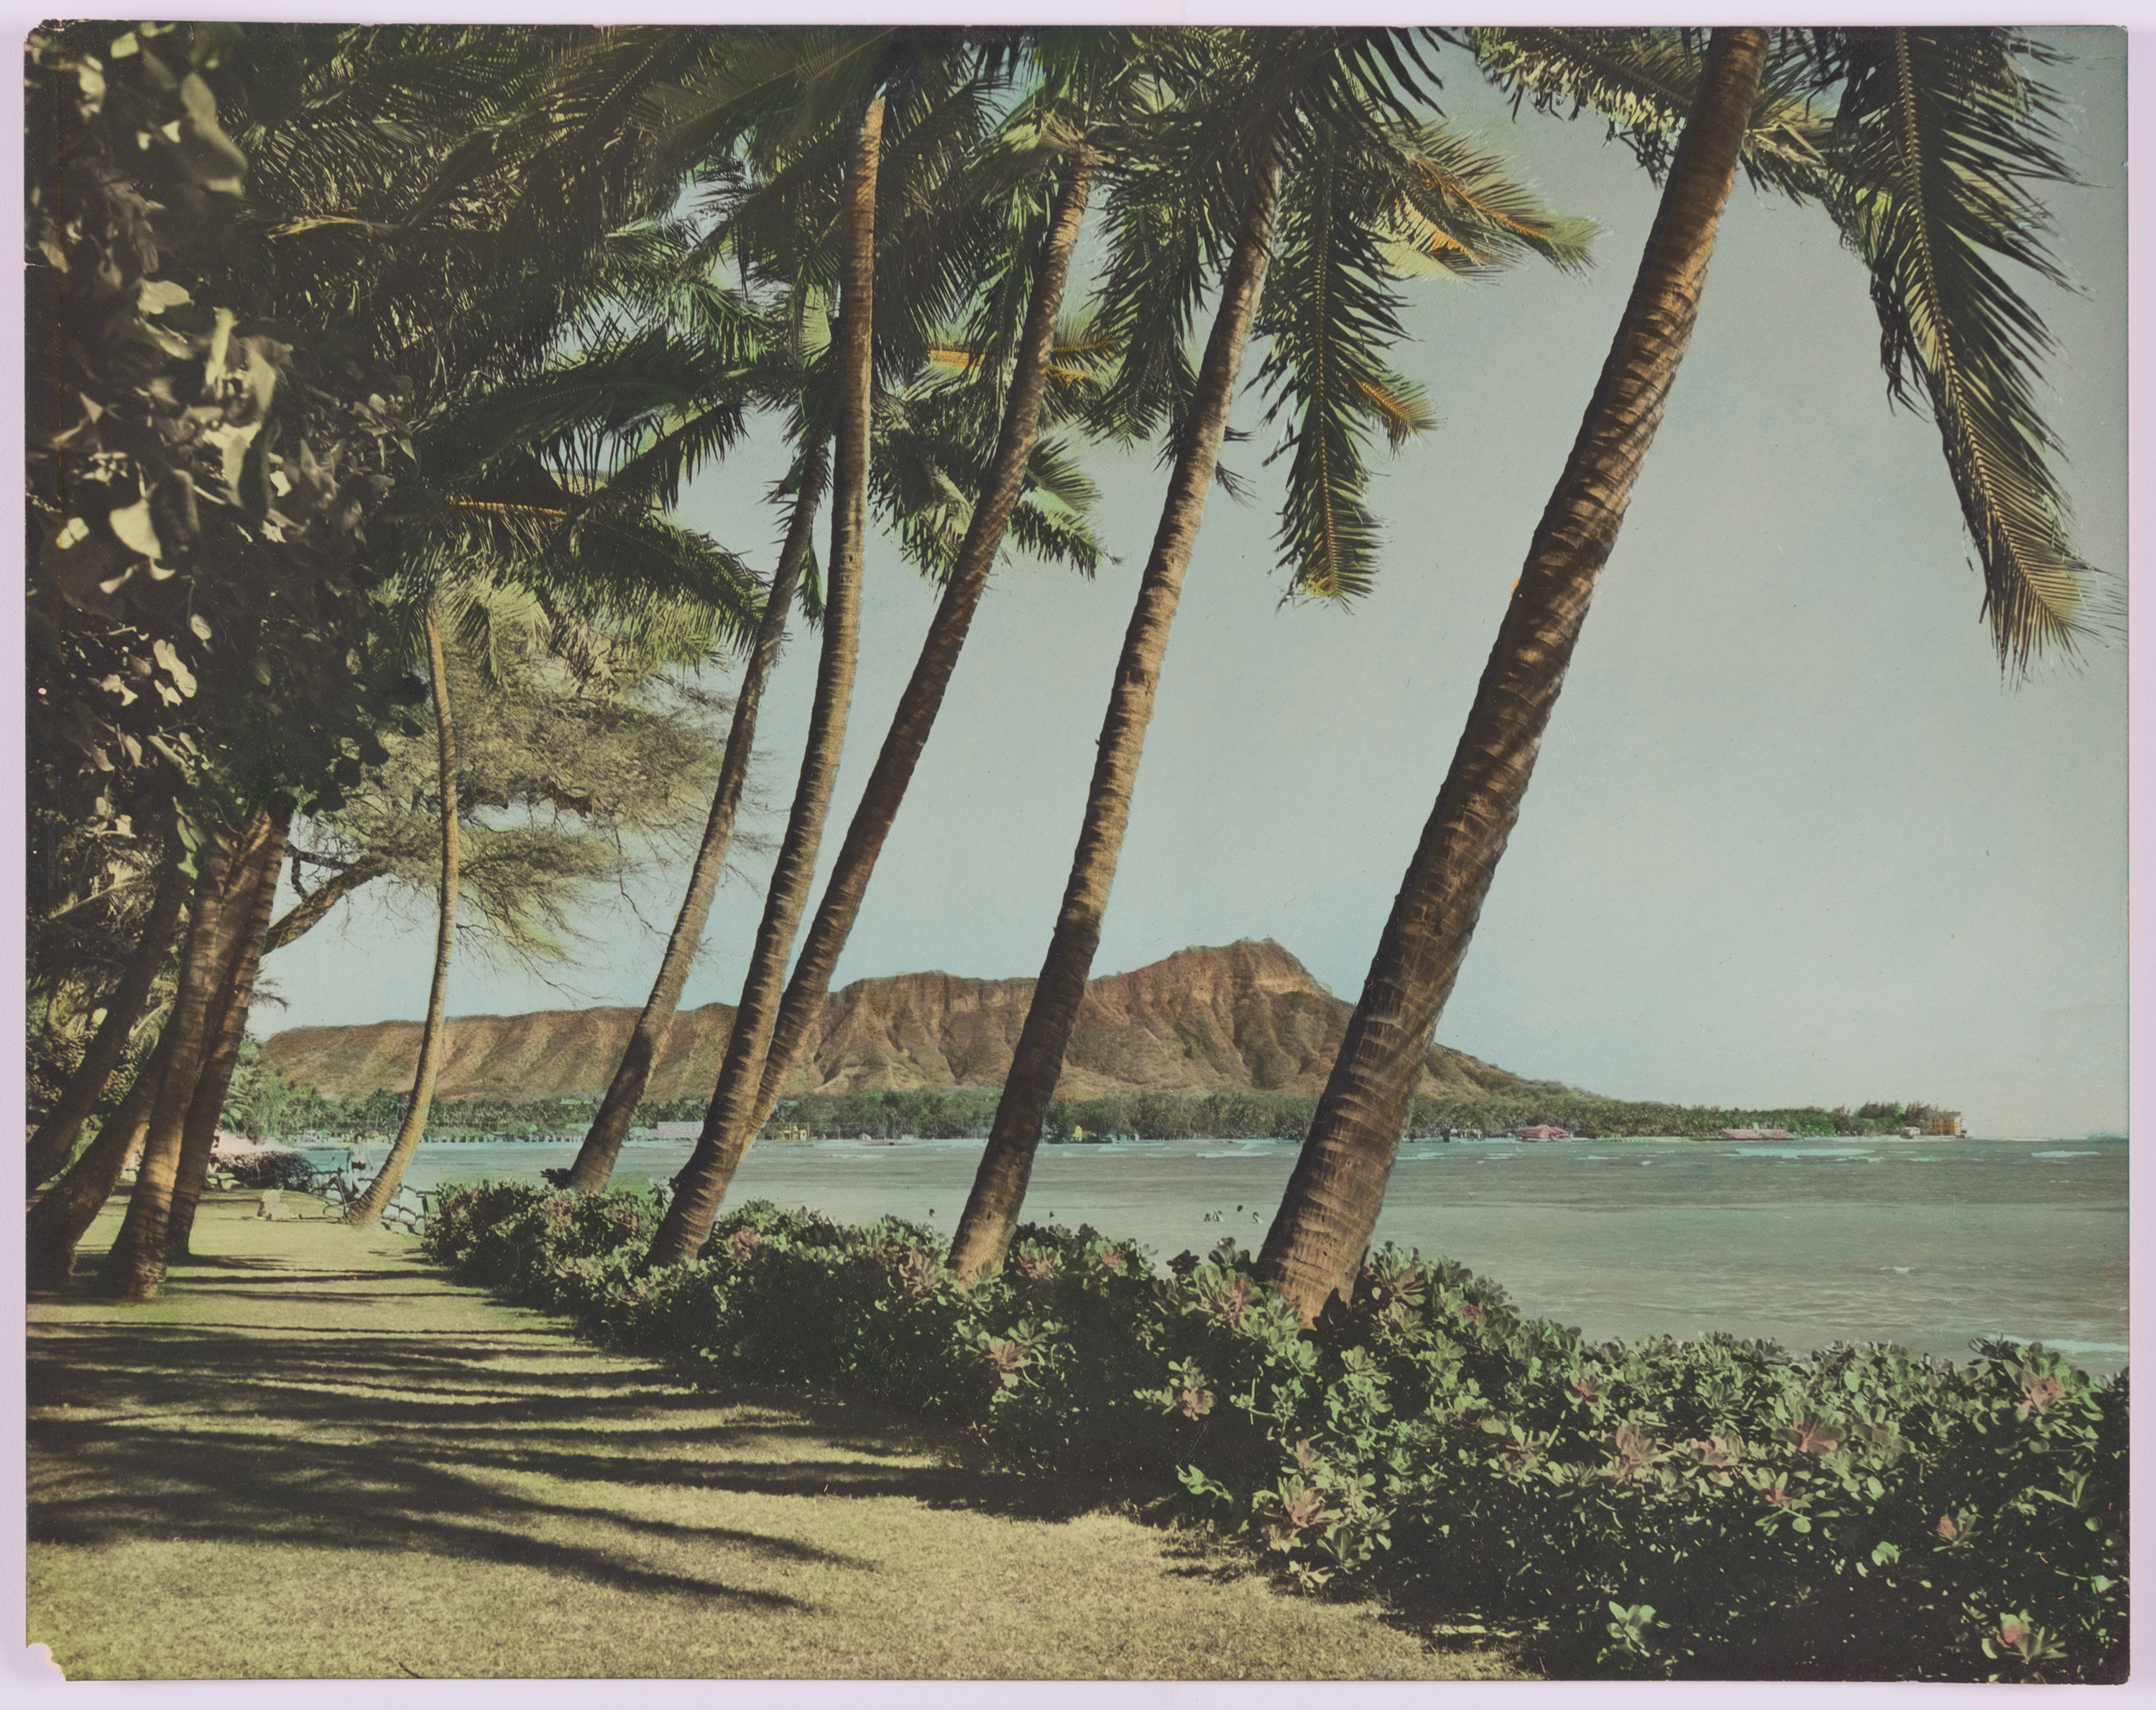 View of Diamond Head, United States, Hawai'i, O'ahu, Honolulu, Waikiki, Hawaiian, n.d., Los Angeles County Museum of Art, partial gift of Mark and Carolyn Blackburn and purchased with funds from LACMA's 50th Anniversary Gala and FIJI Water, digital photo © Museum Associates/LACMA